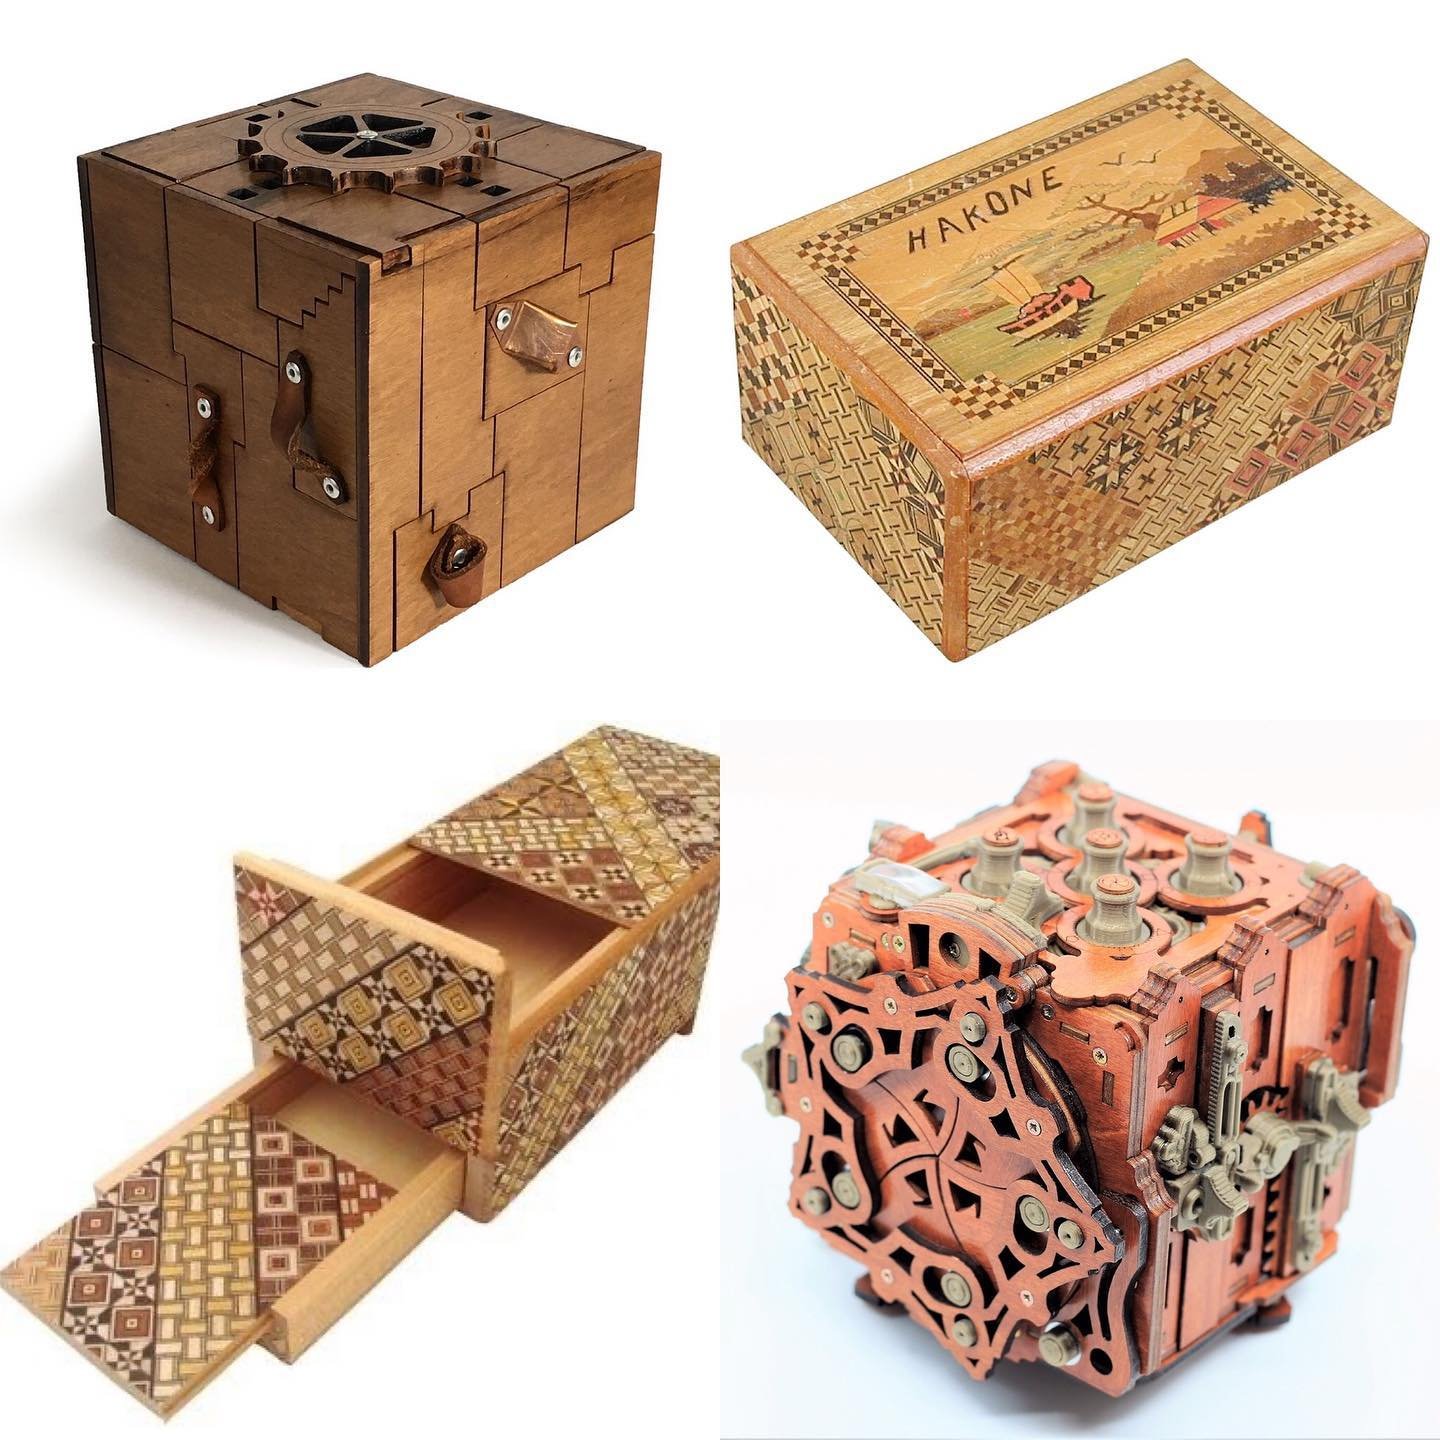 Hakone, Japan was birthplace of the puzzle box in the 19th century. Today, young designers are taking the concept to new places. Check out the work of some of our favorites and order yourself one of these unique creations - support puzzle artisans! @